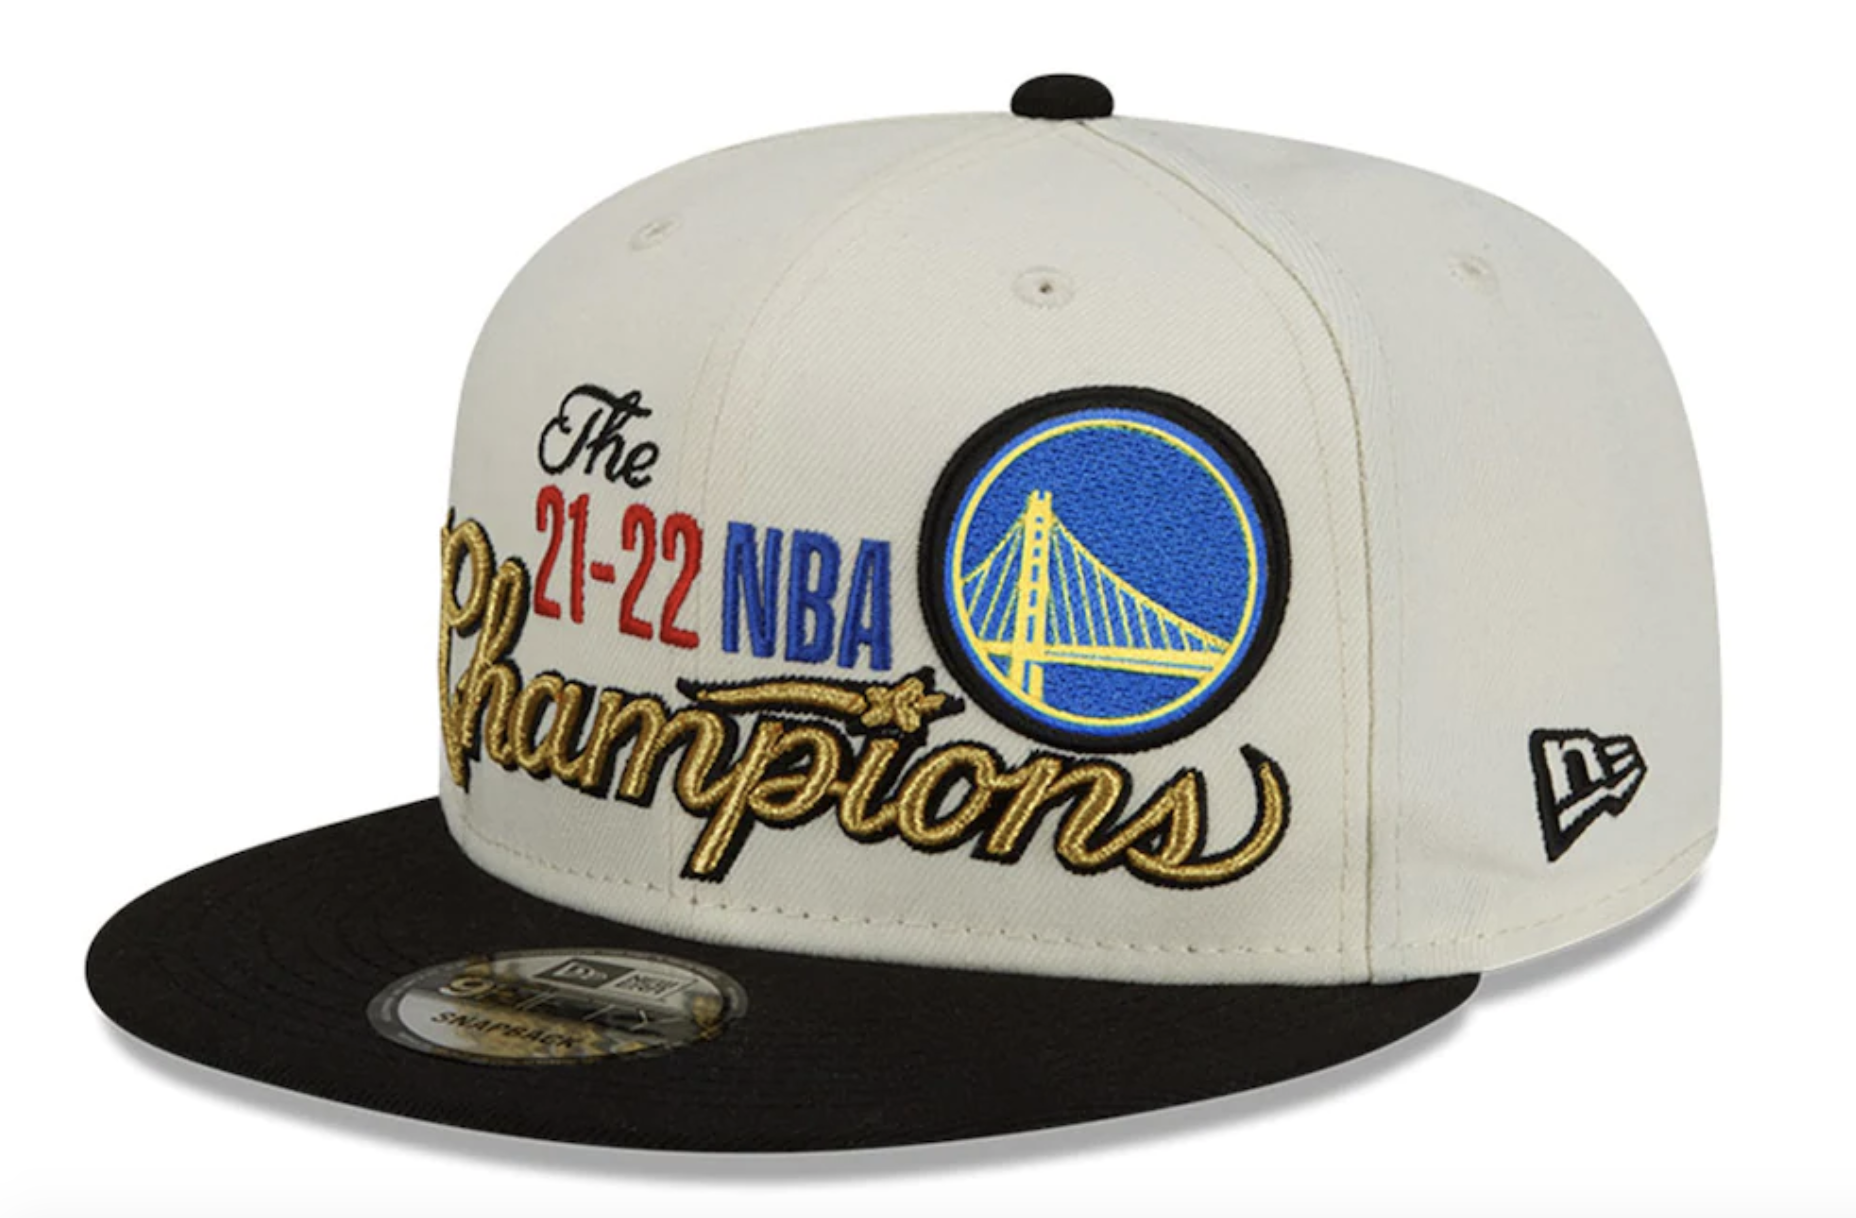 Golden State Warriors NBA Champions 2022 shirts, hats, more gear: Where to  buy 